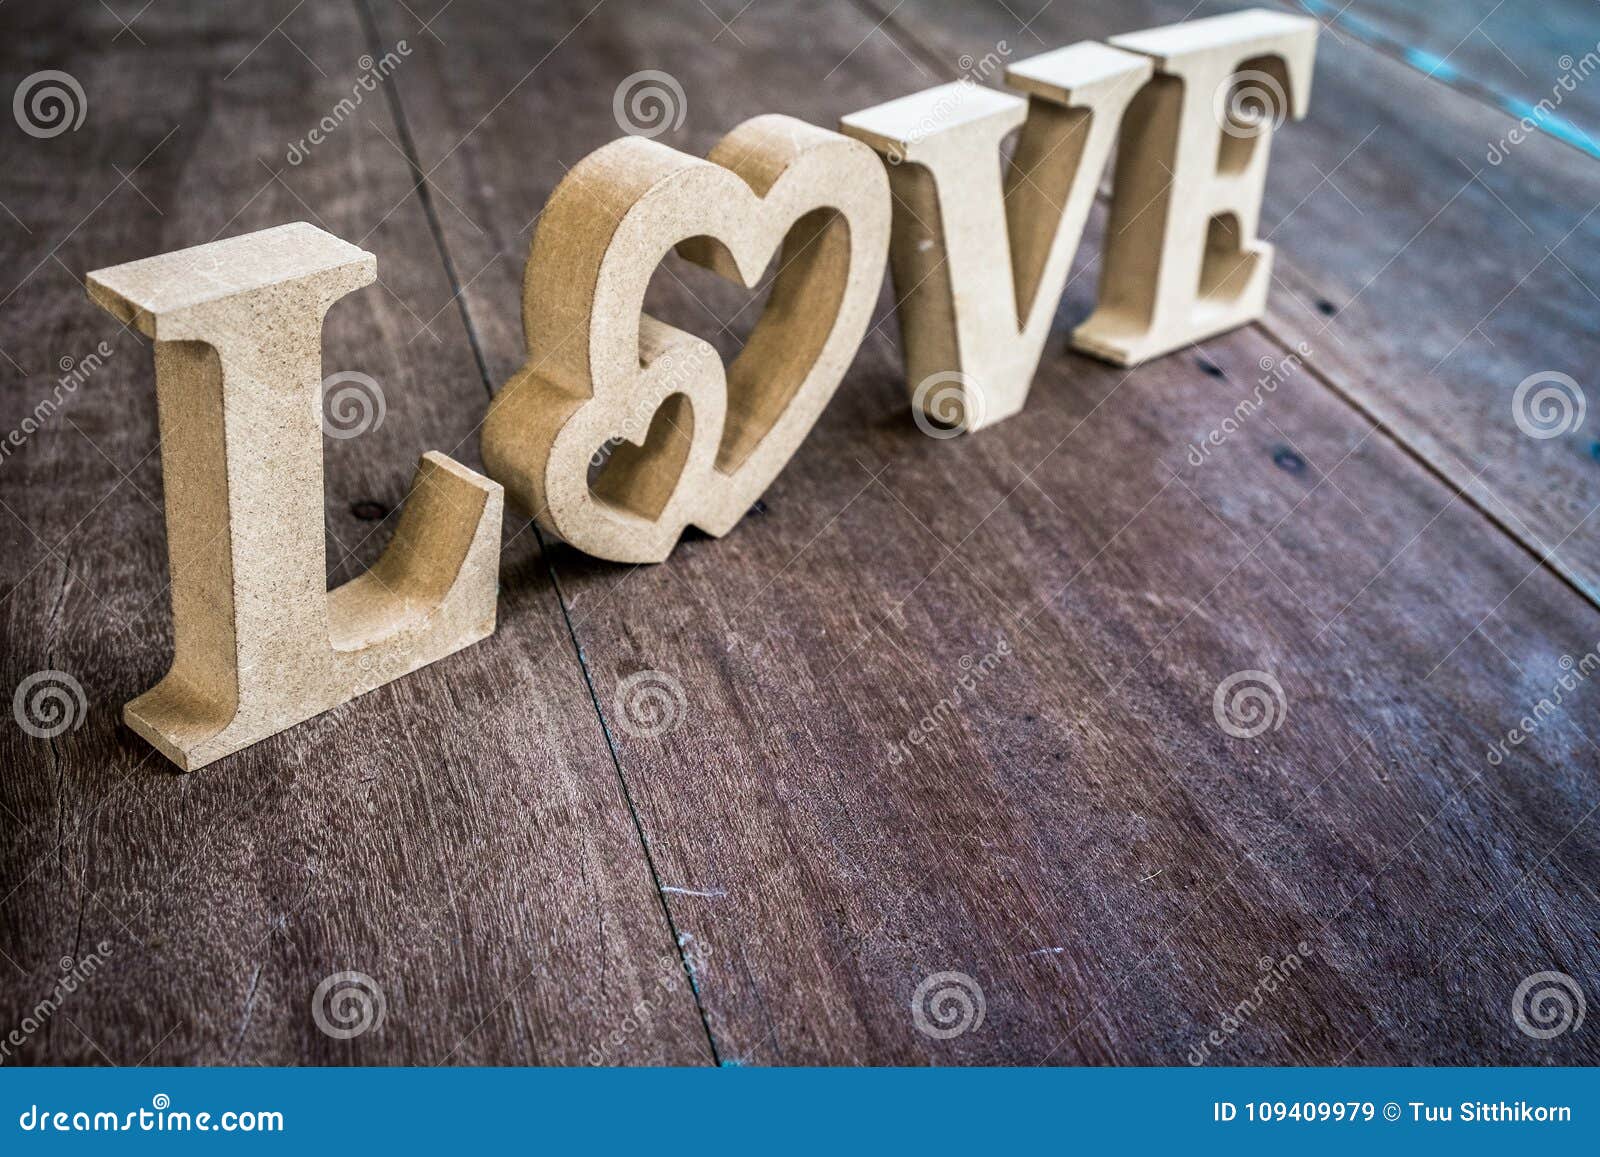 Love Letter Made from Wood on the Old Wooden Floor Stock Image - Image ...